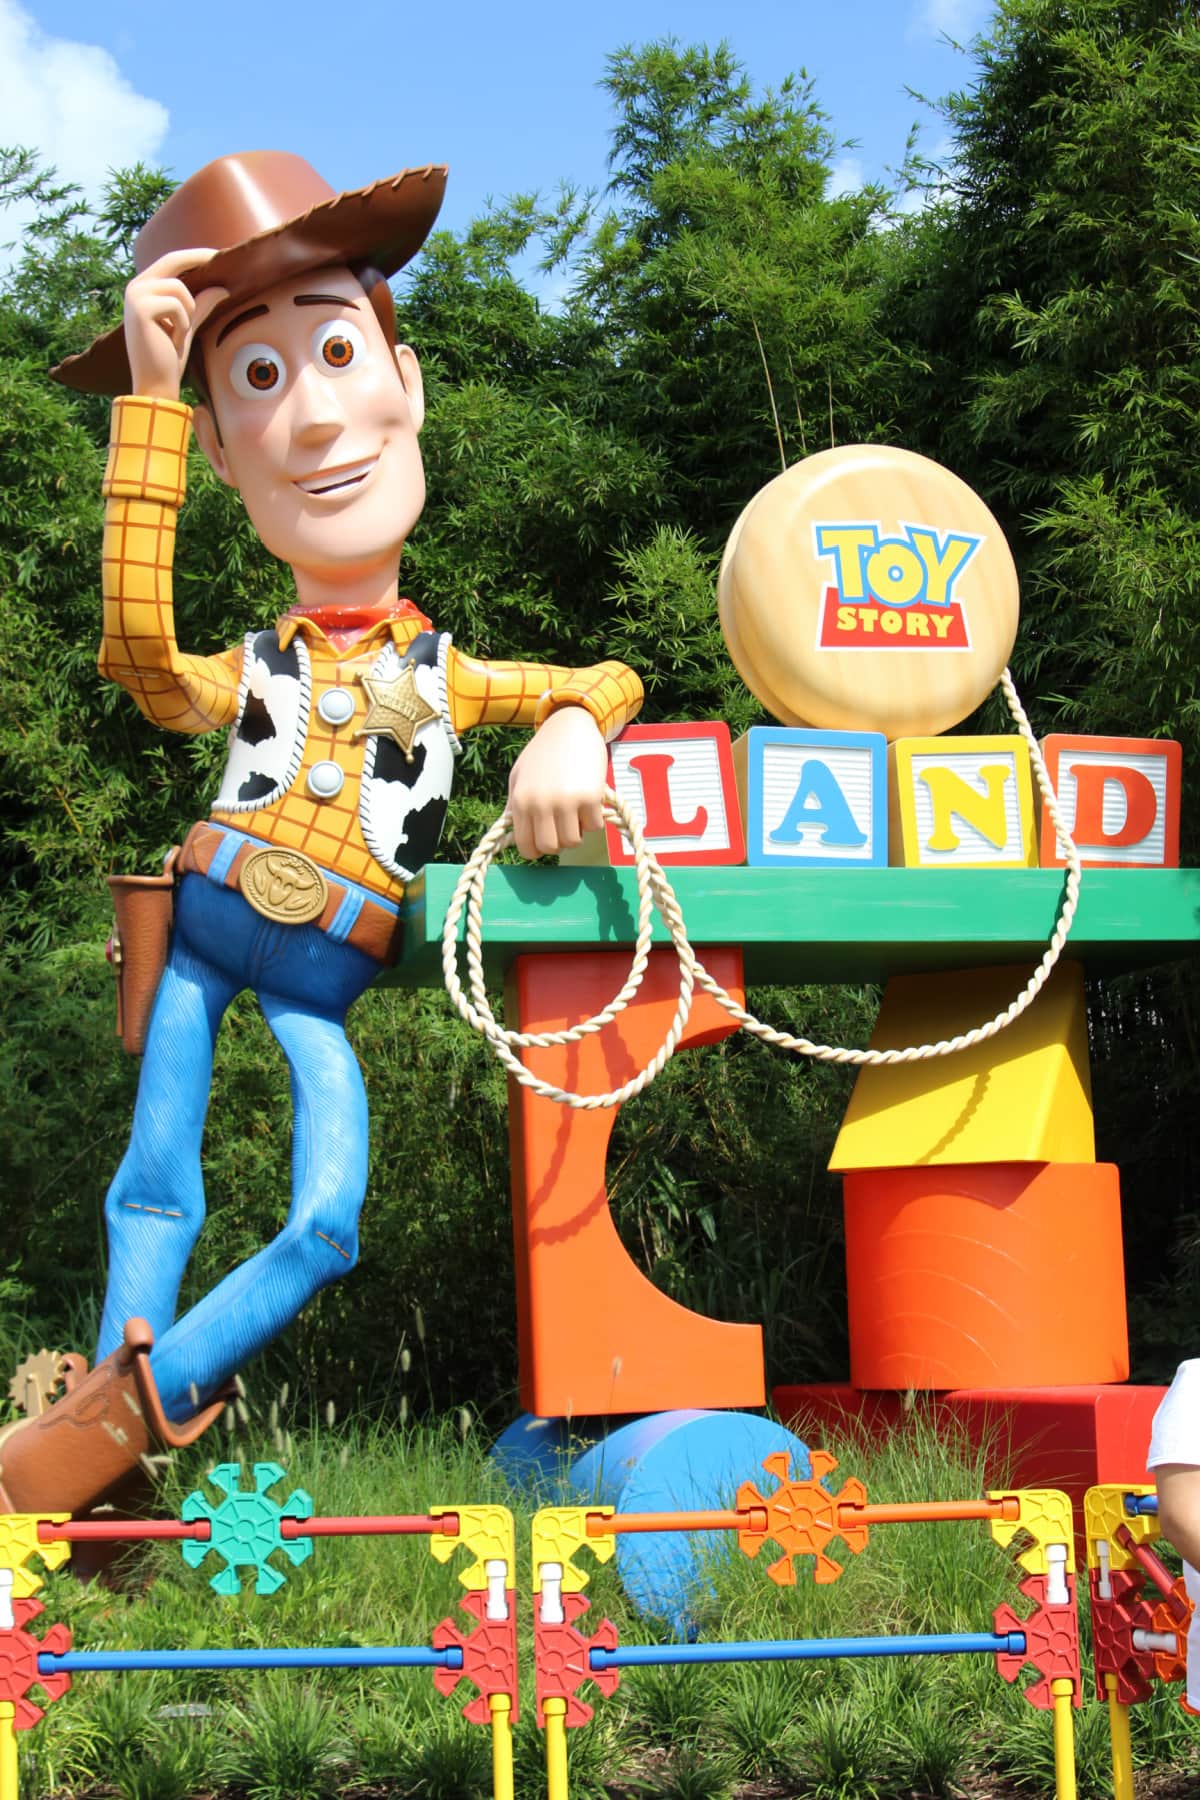 Giant Woody statue at entrance to Toy Story Land